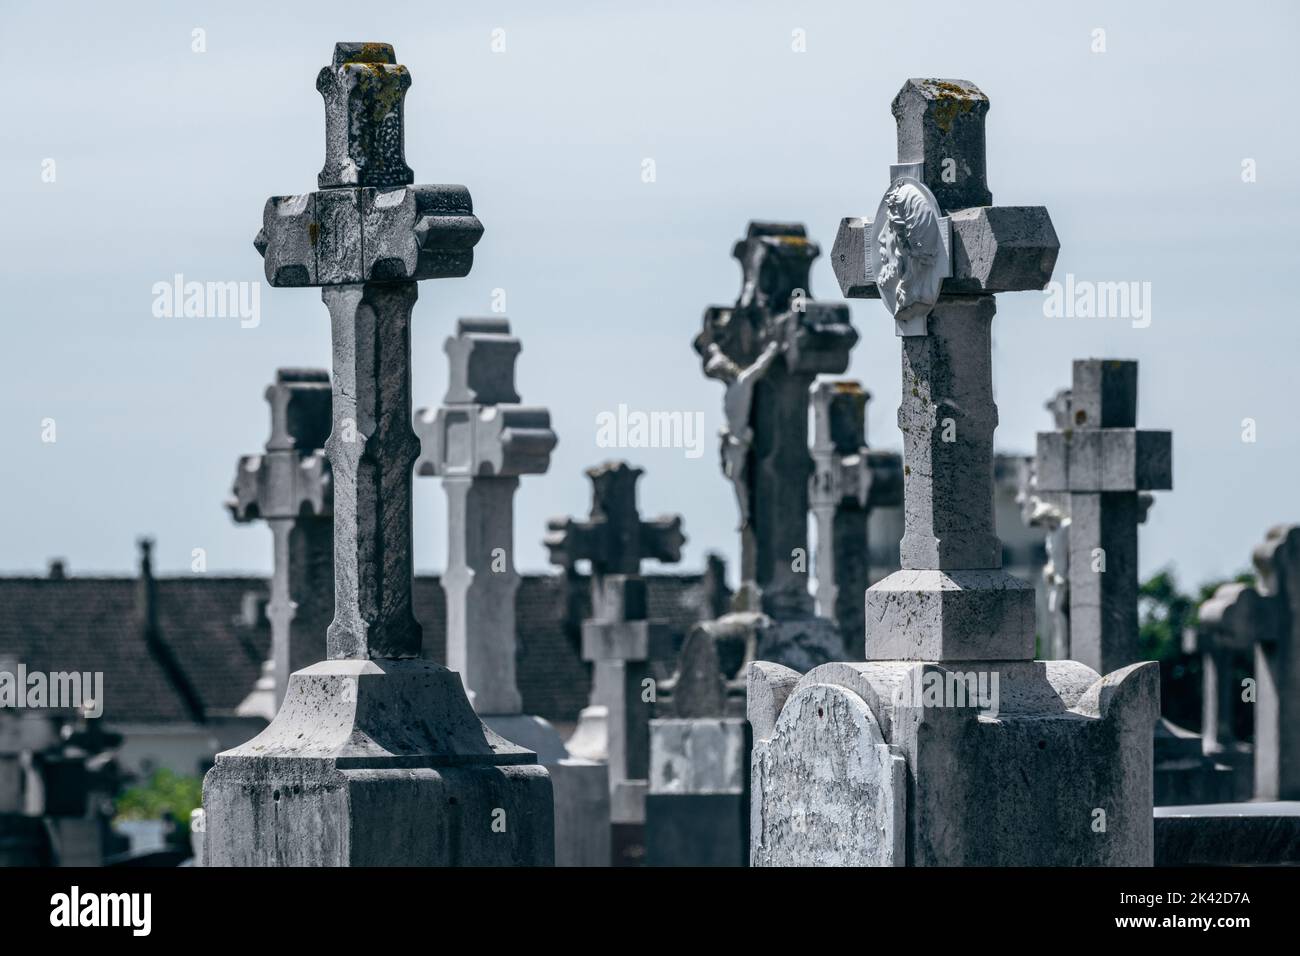 Tombstones and crosses at a french cemetery Stock Photo